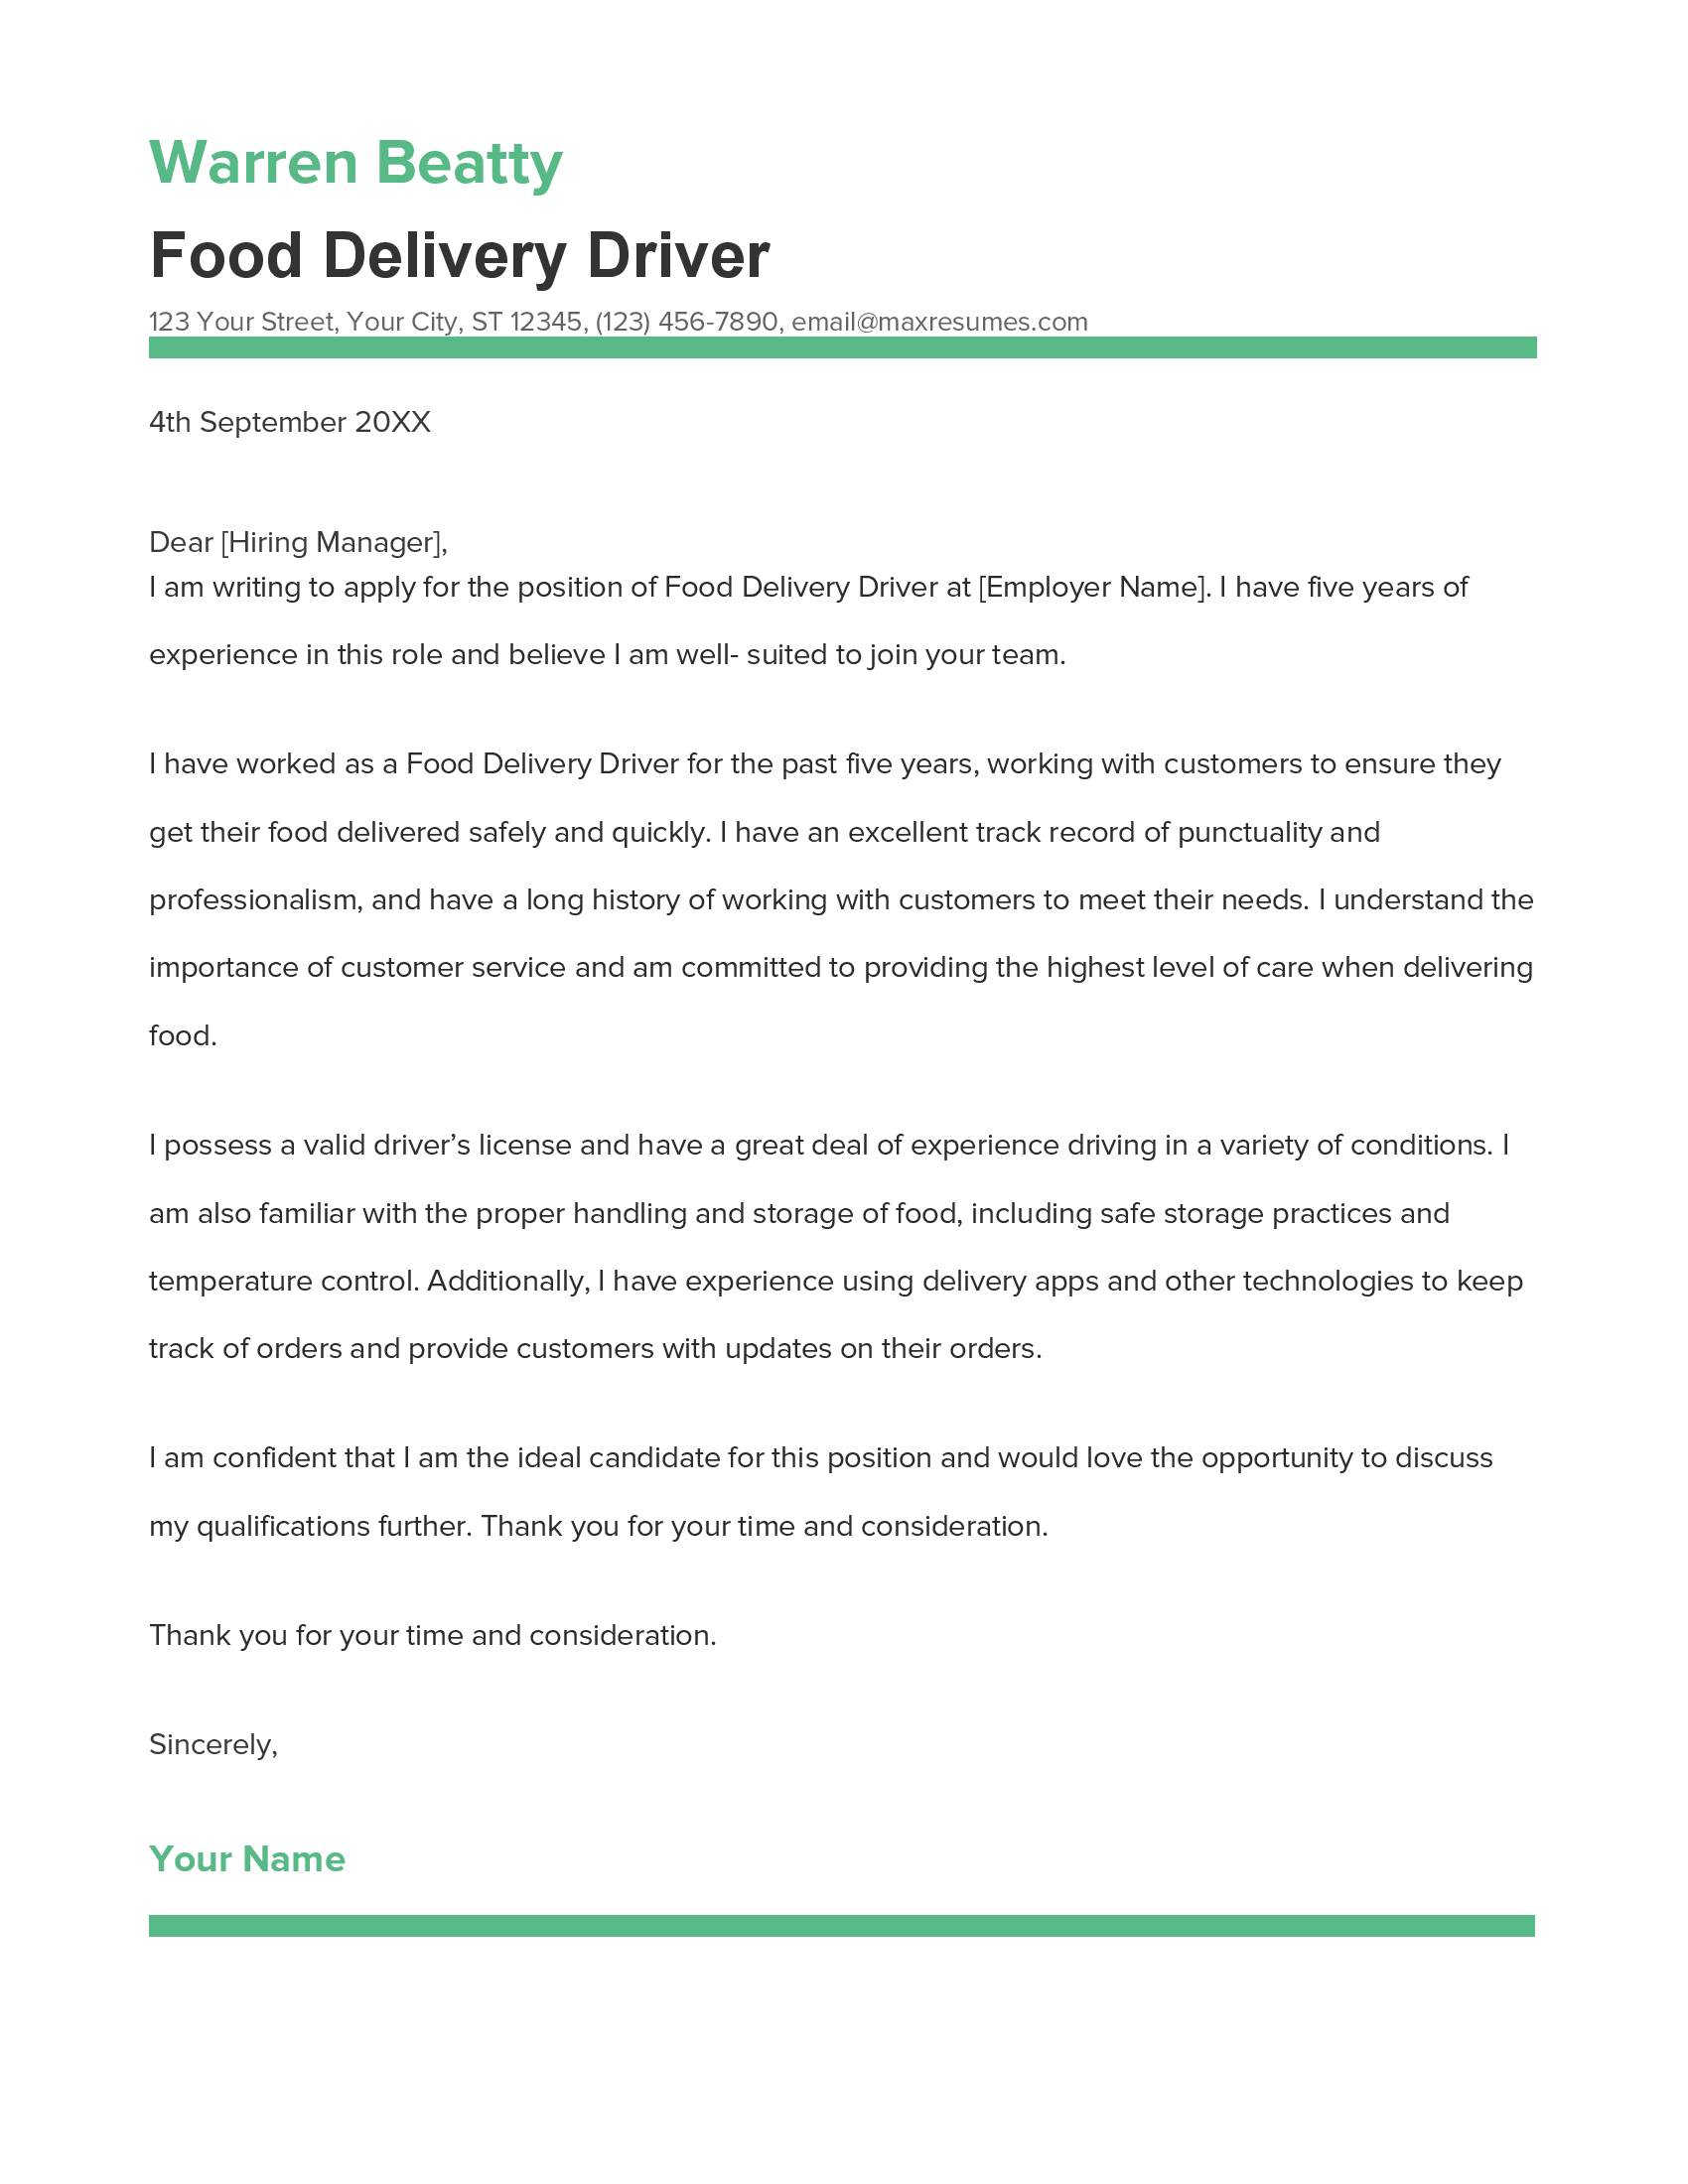 Food Delivery Driver Cover Letter Example